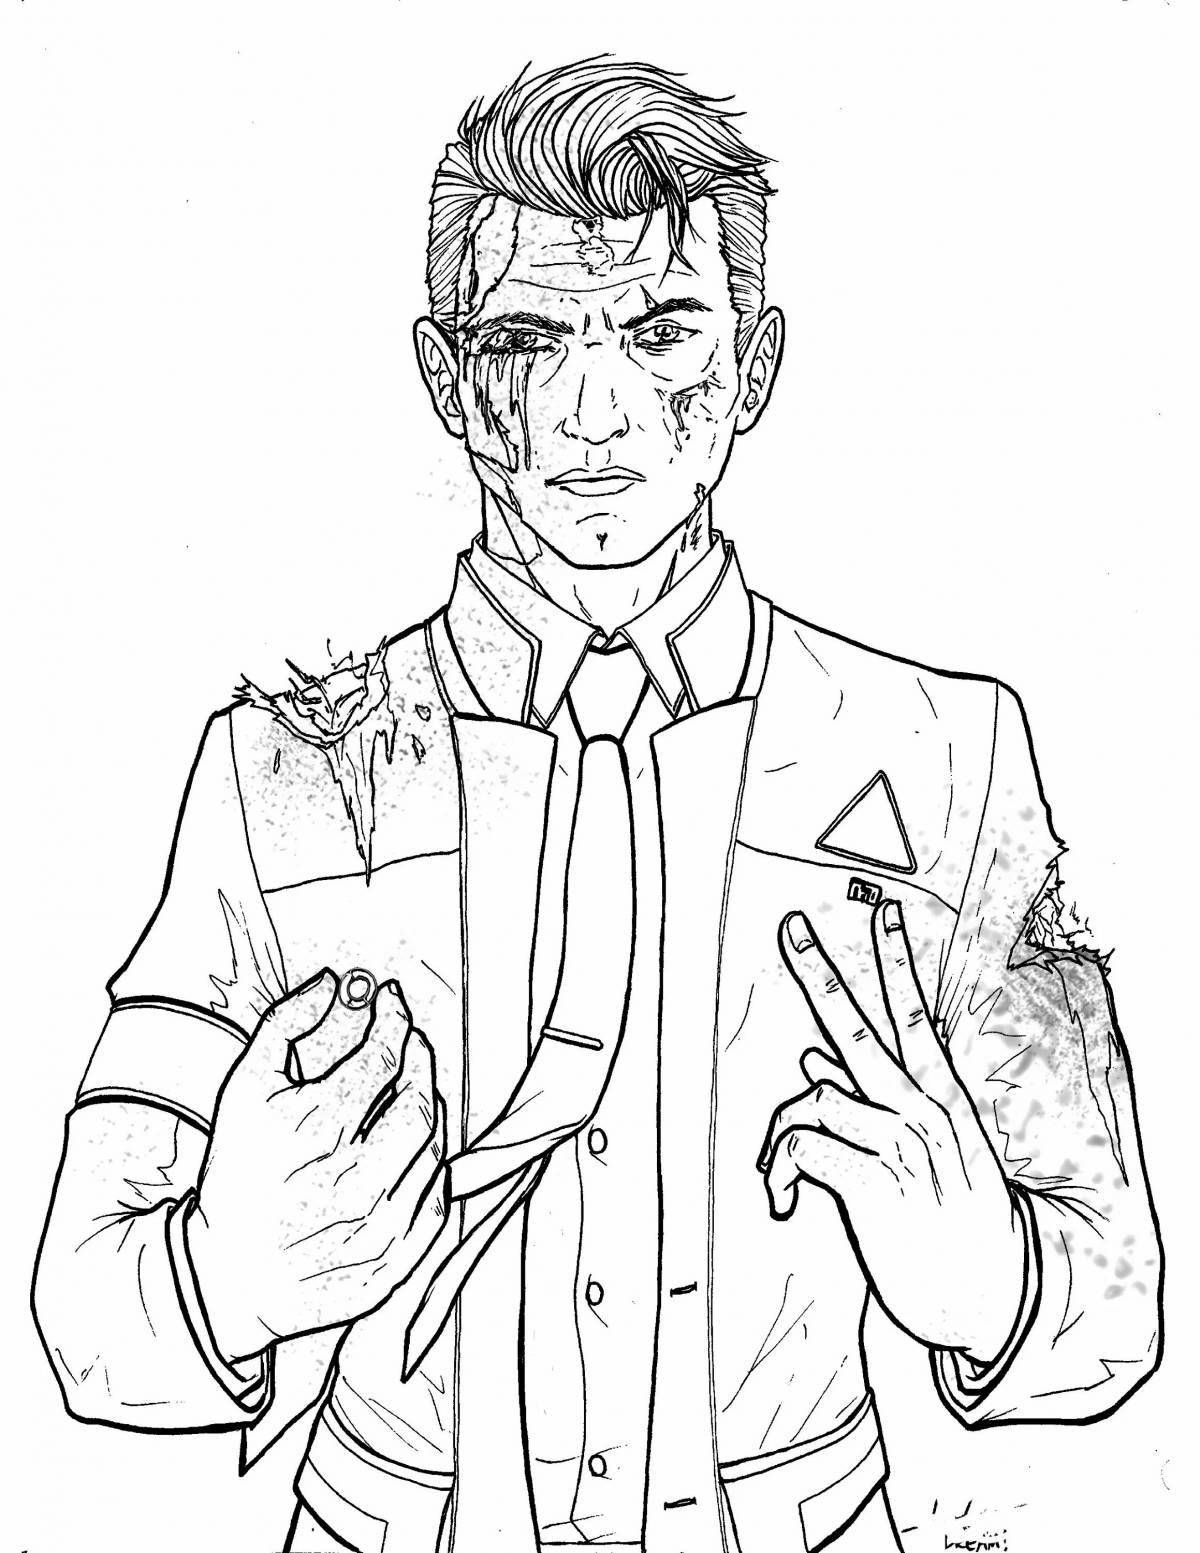 Exciting connor coloring page